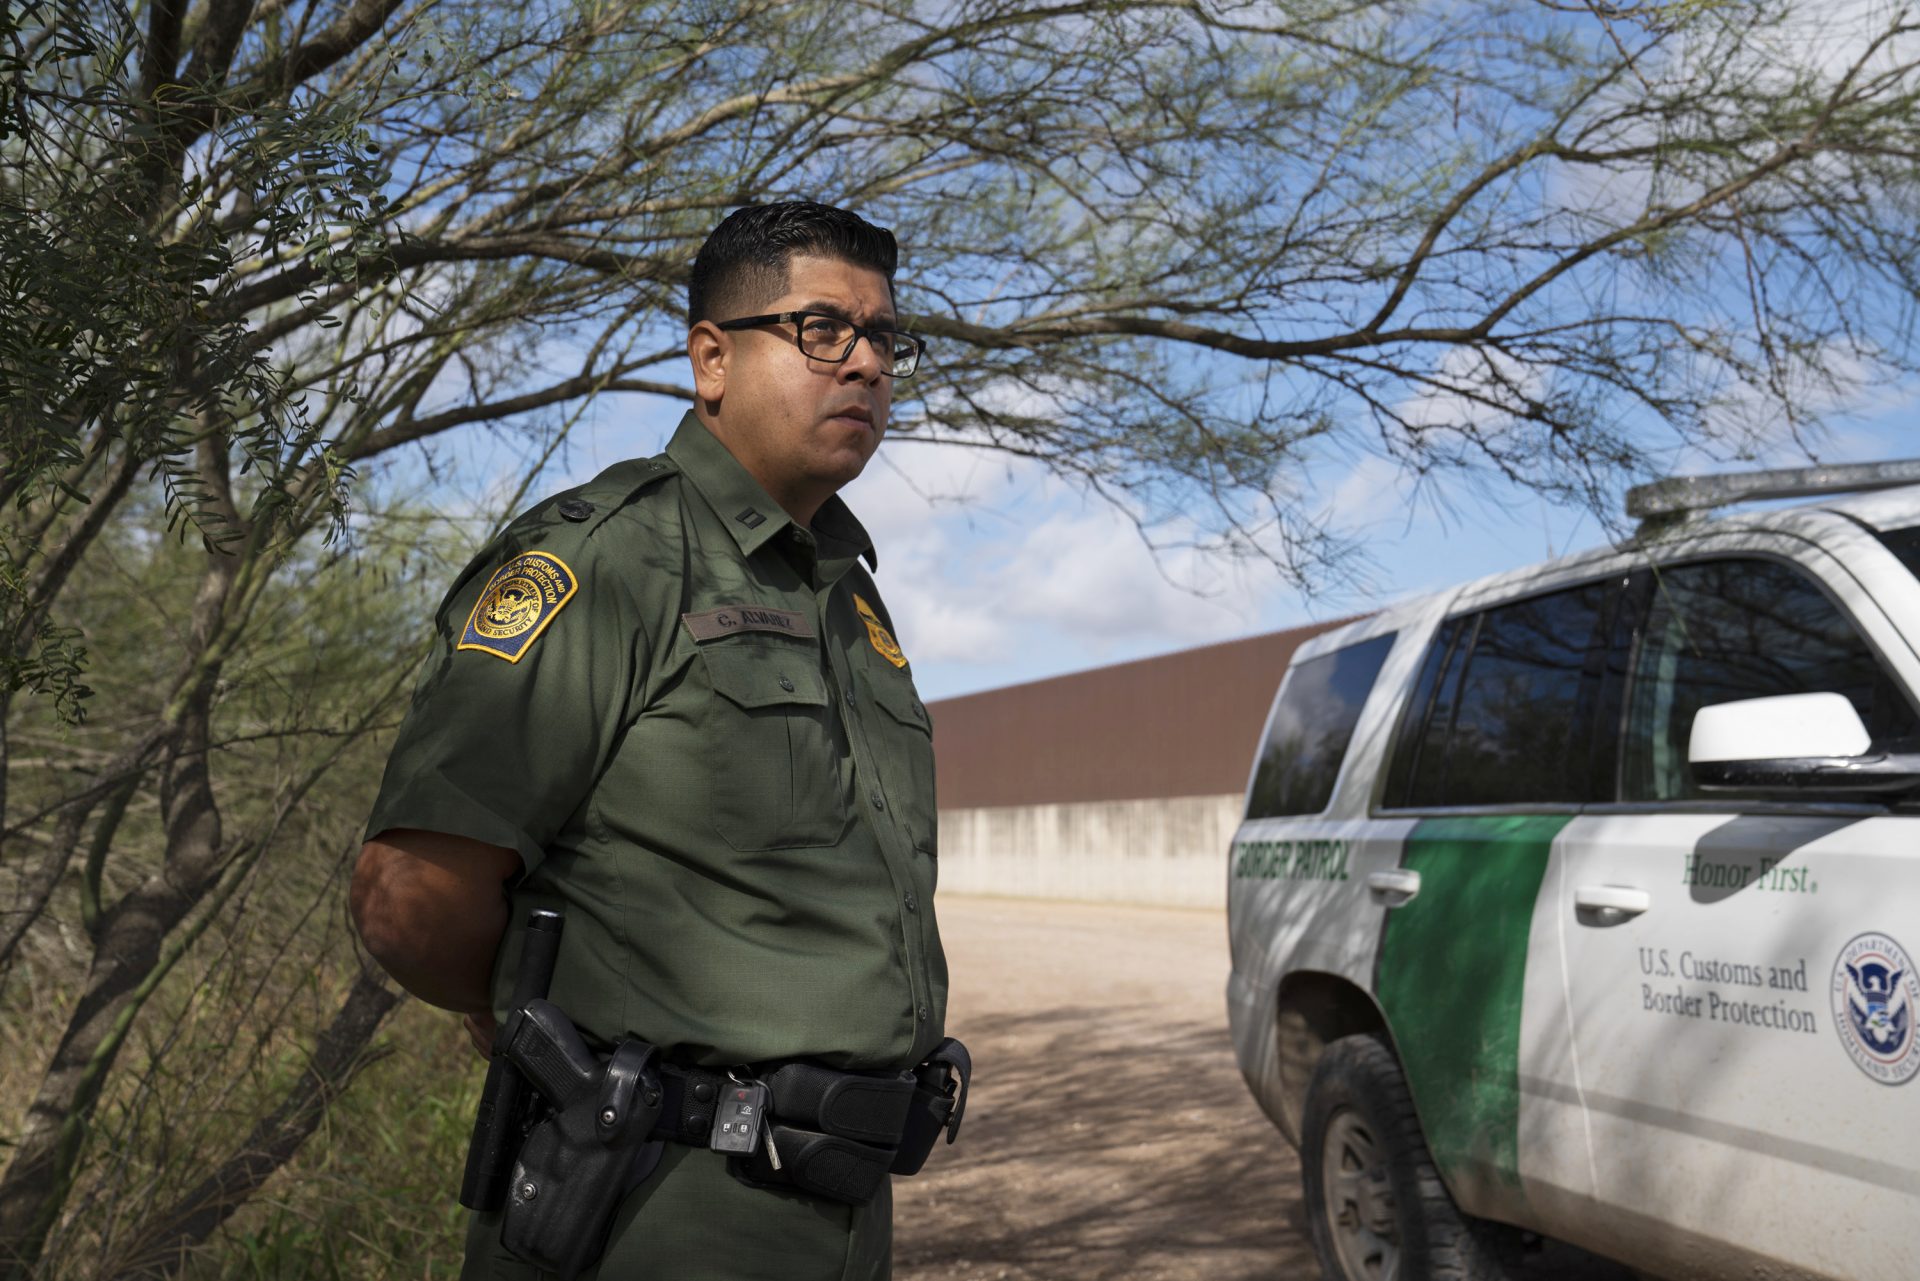 "The border wall system will include a 150-foot enforcement zone, lighting, cameras, other technology, and most importantly an all-weather access road making it easier to respond to traffic," Christian Alvarez, a Border Patrol spokesman, says.